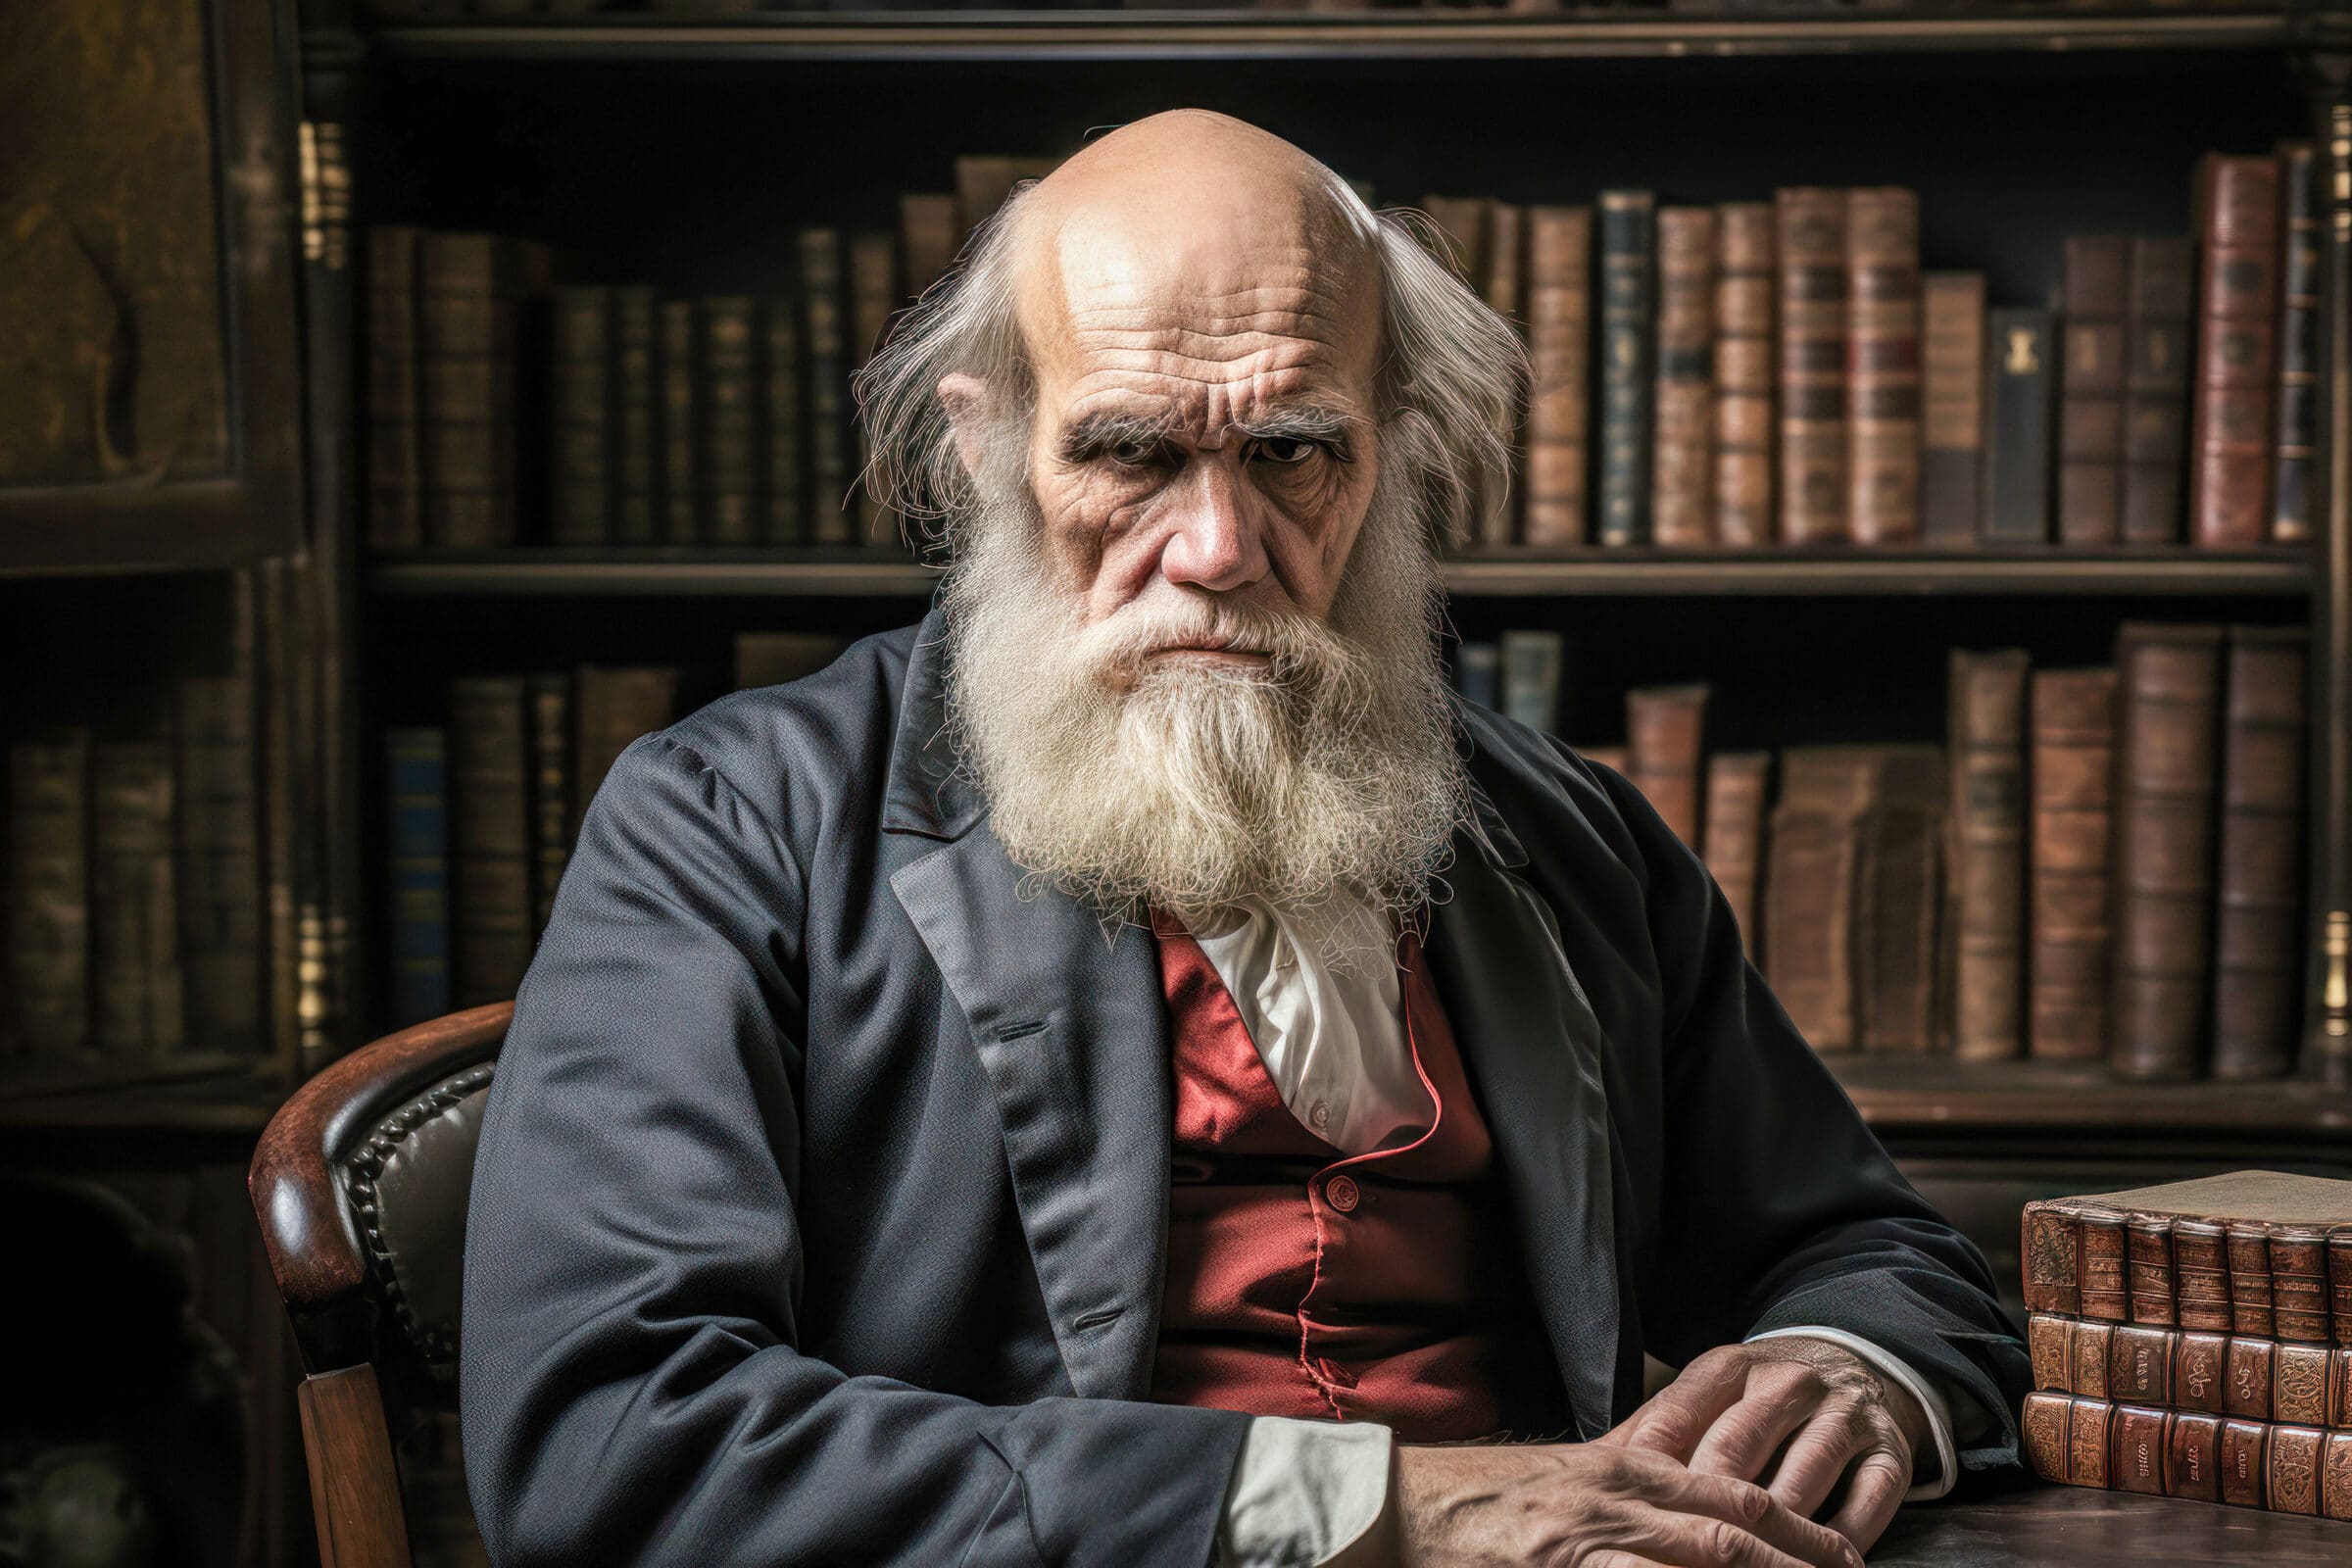 Charles Darwin, the English scientist whose theory of evolution revolutionized biology